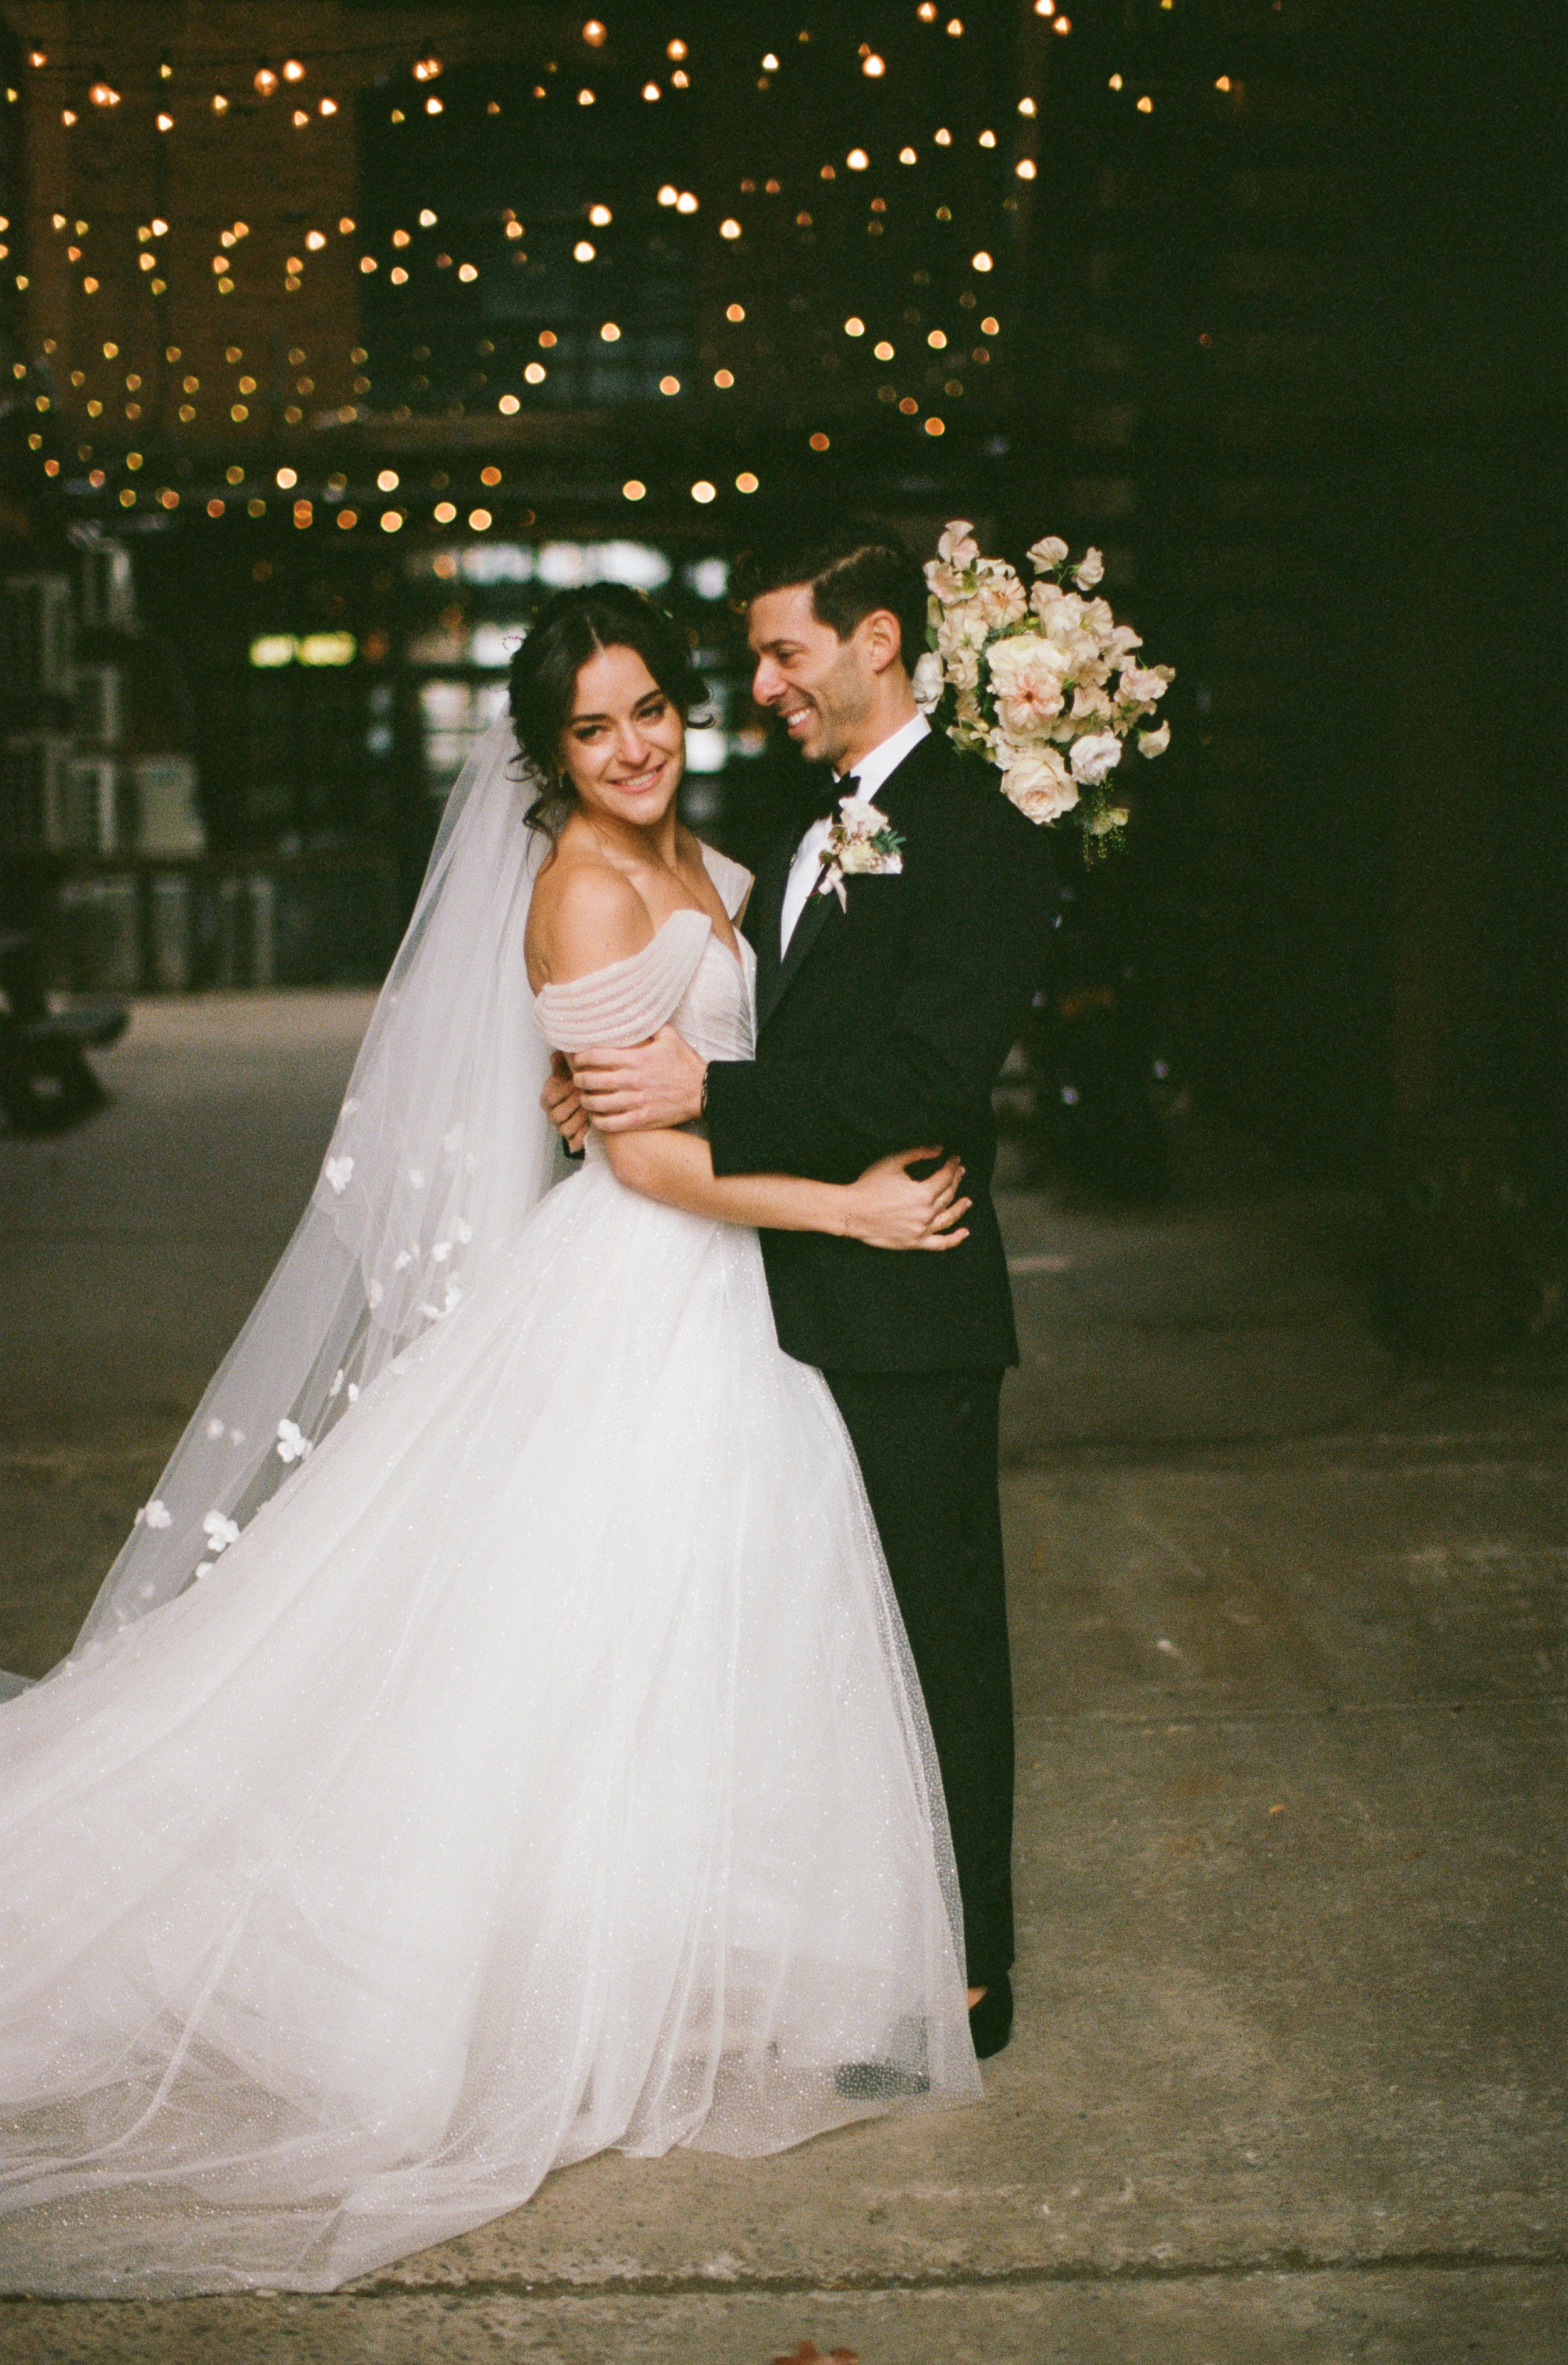 Film wedding photography with a romantic touch